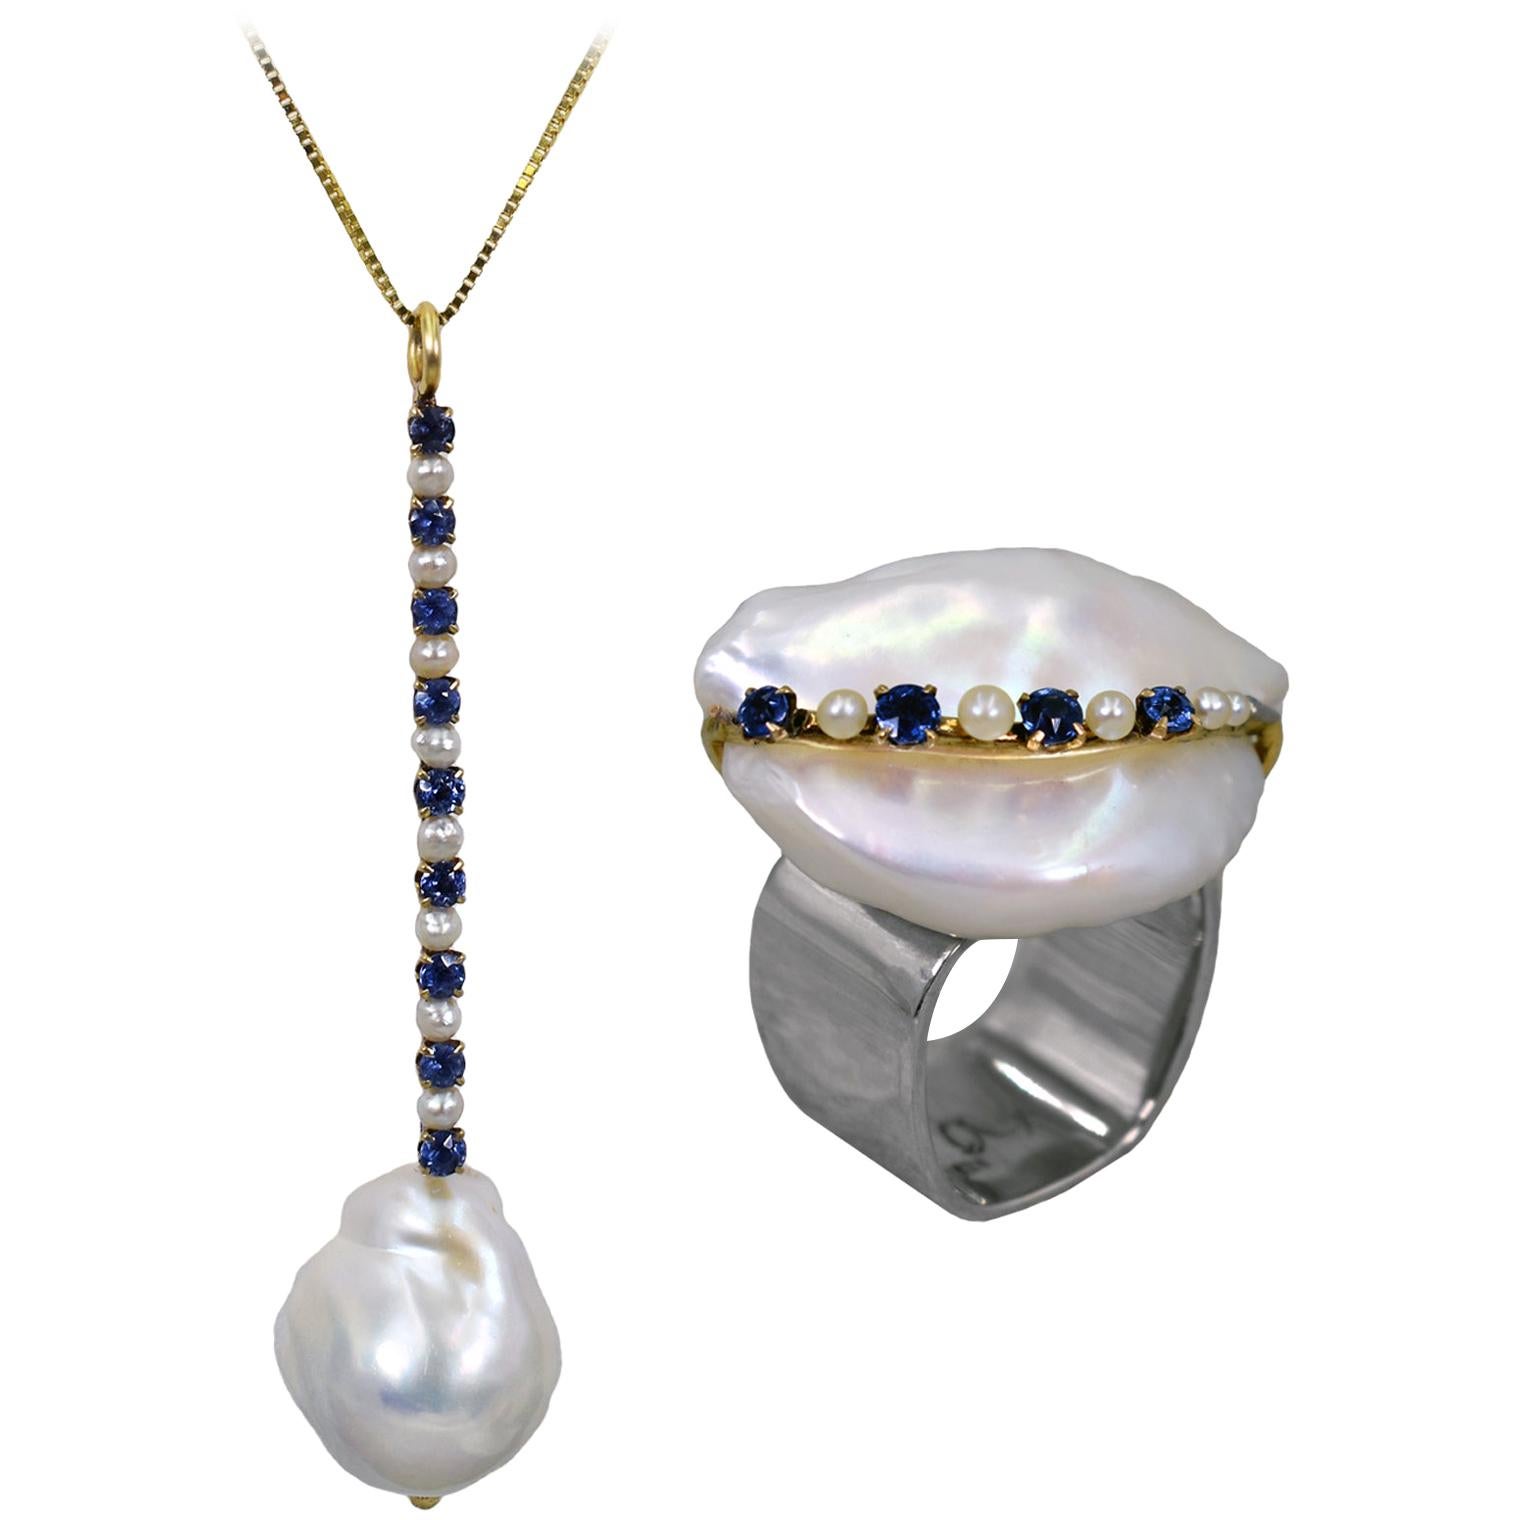 Baroque Pearl, Blue Sapphire & 14k Gold Pendant Necklace and Cocktail Ring Set